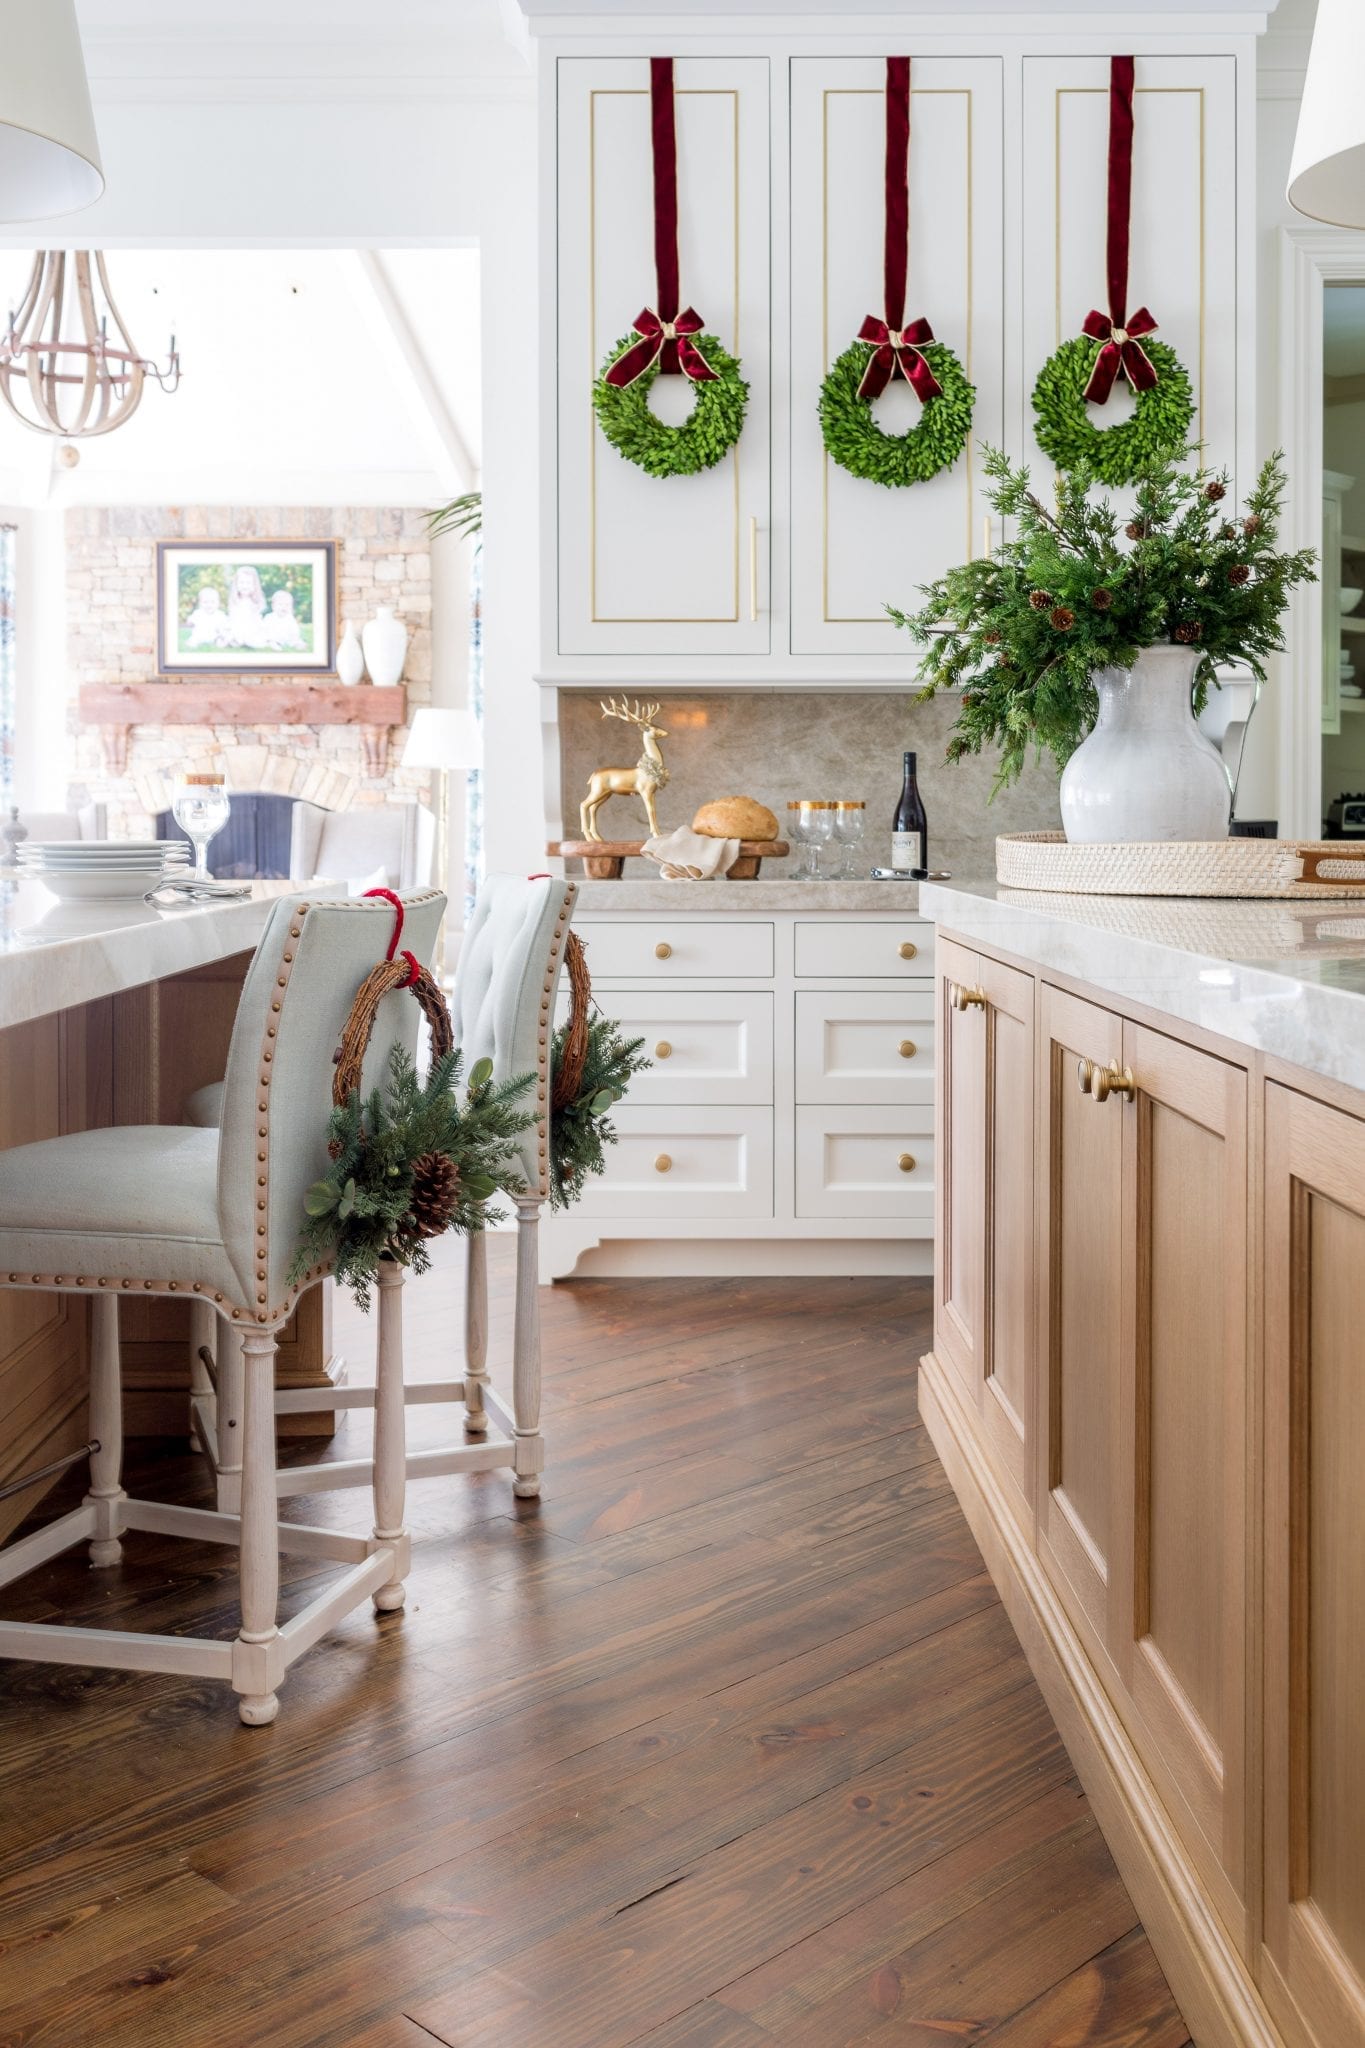 5 Top Picks For Wreaths On Kitchen Cabinets Bluegraygal